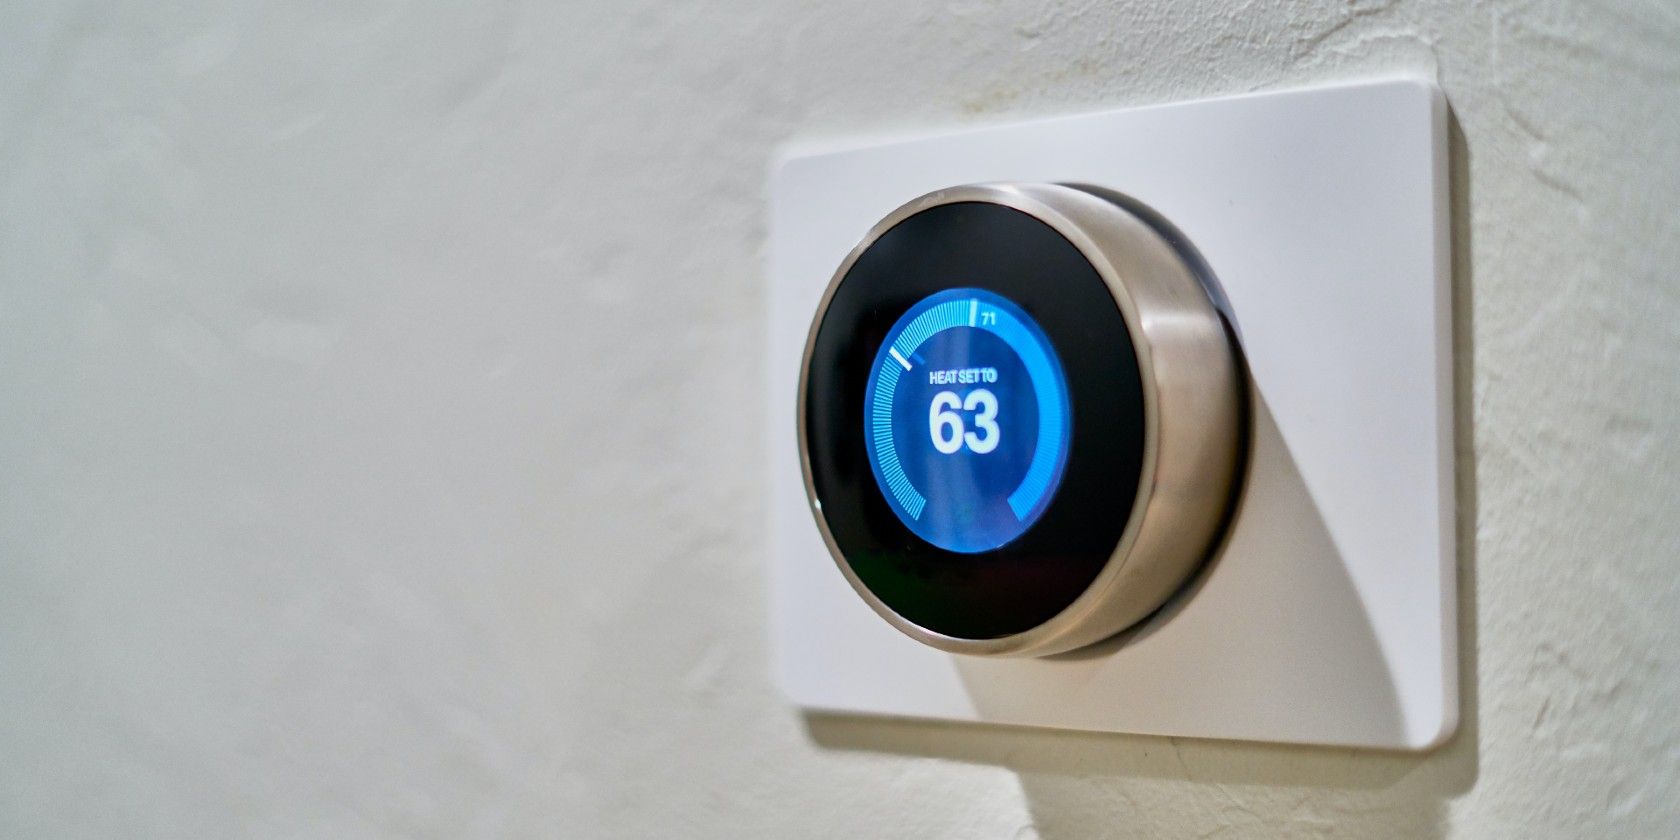 A gray Nest thermostat mounted on the wall showing the temperature.